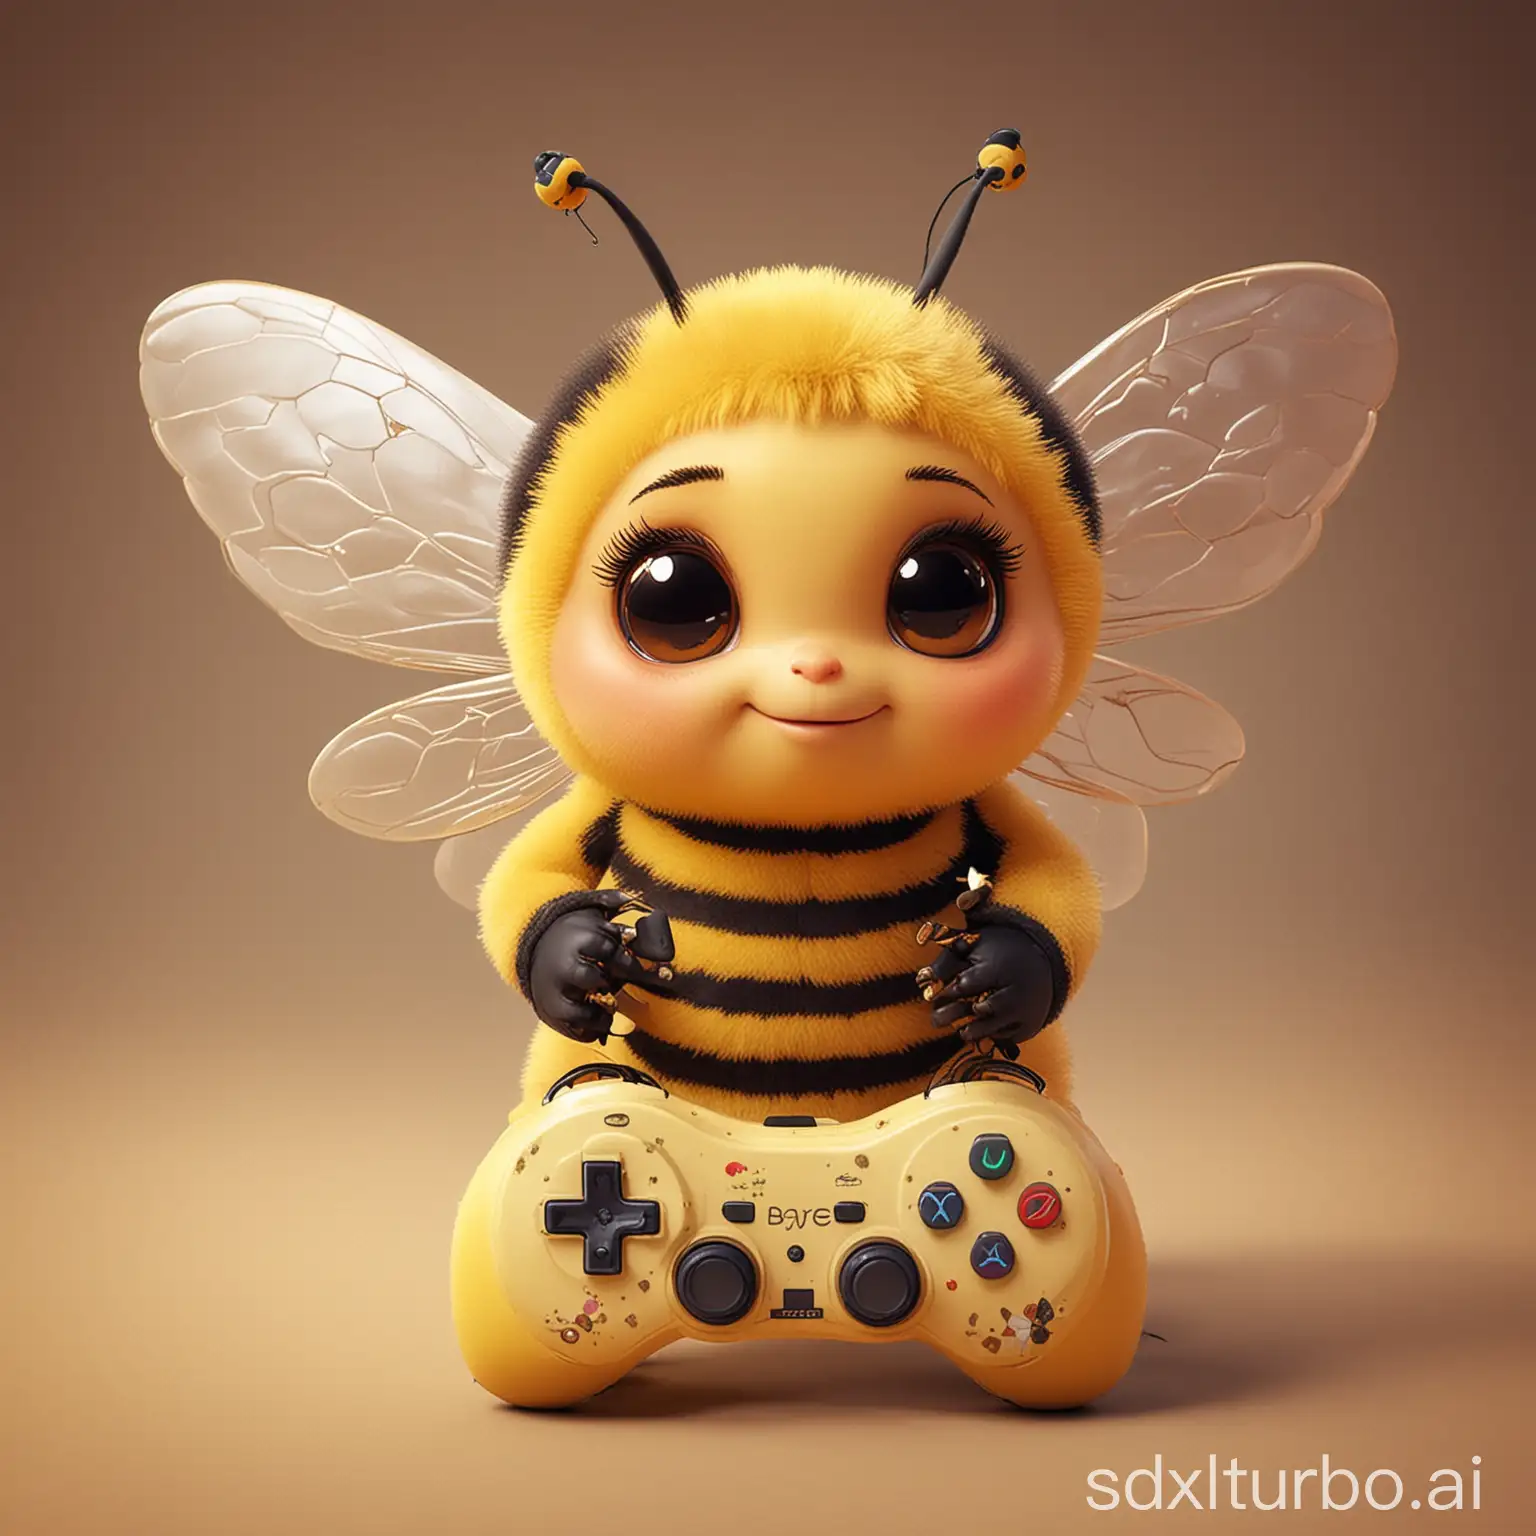 Cute-Bee-Playing-with-Game-Controller-Fun-and-Adorable-Insect-Gamer